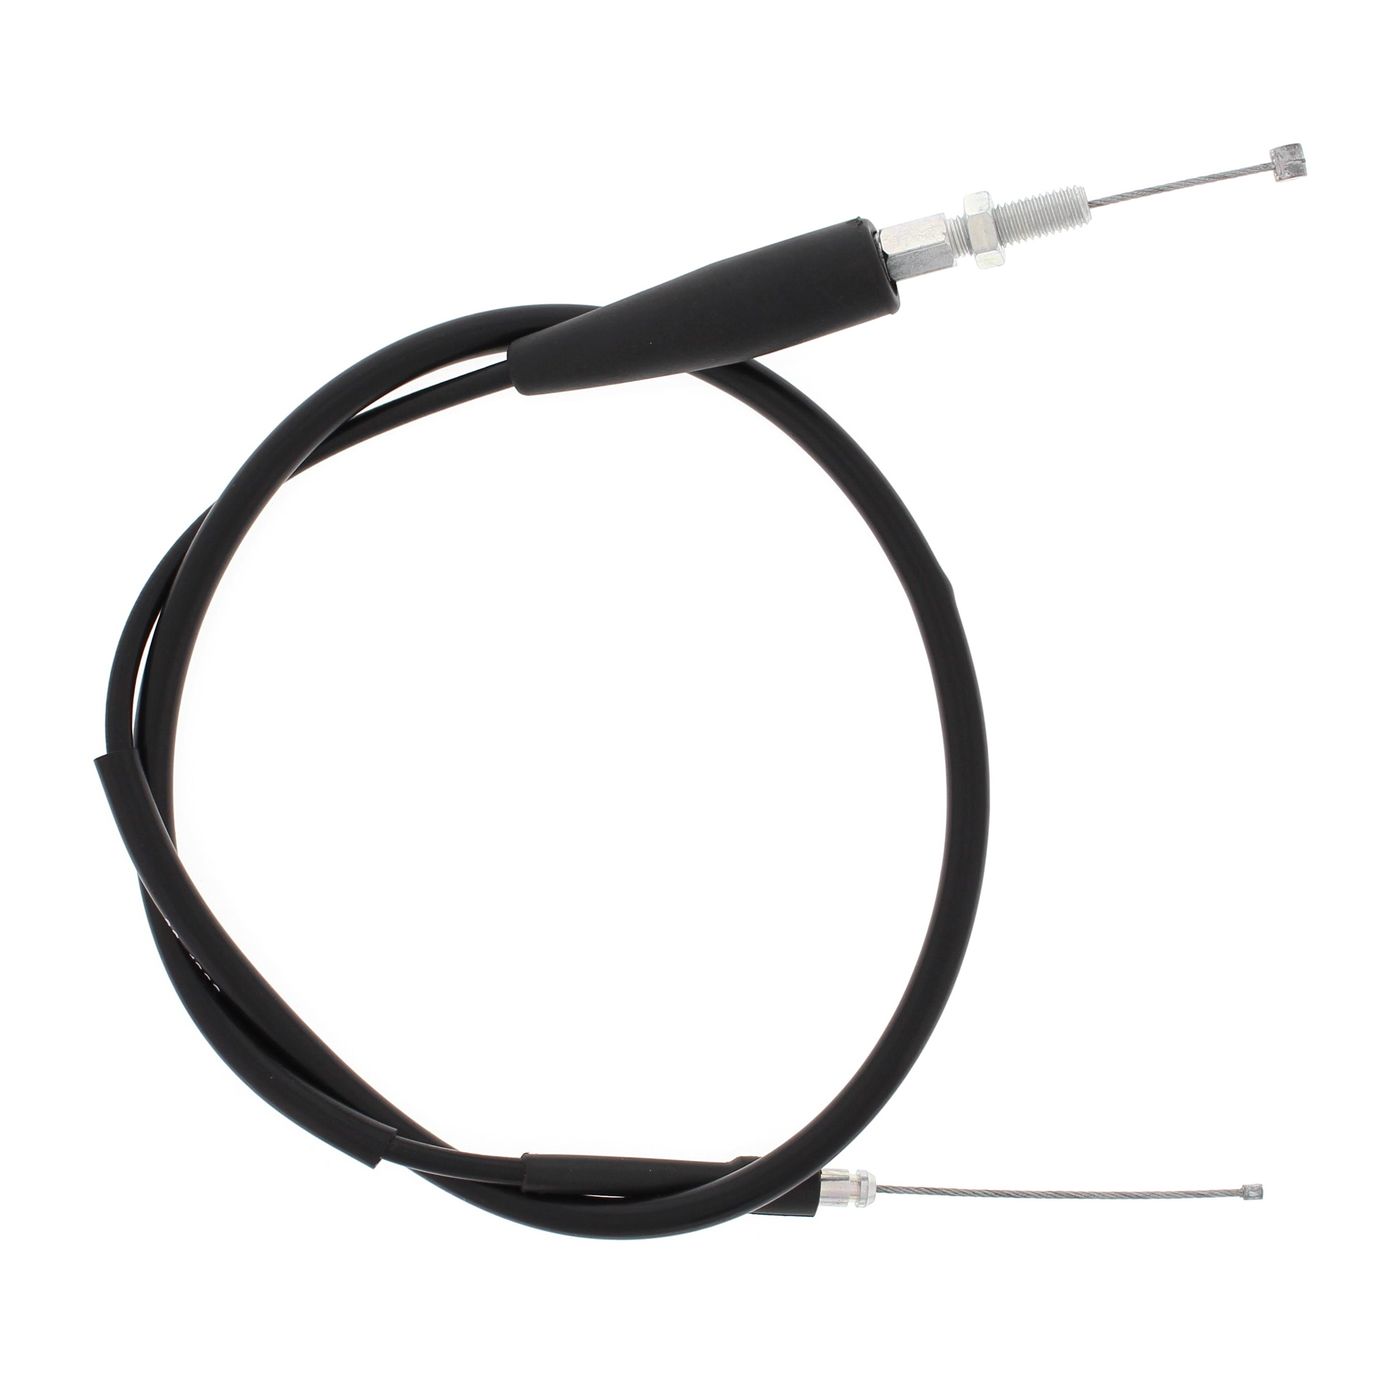 Wrp Throttle Cables - WRP451203 image